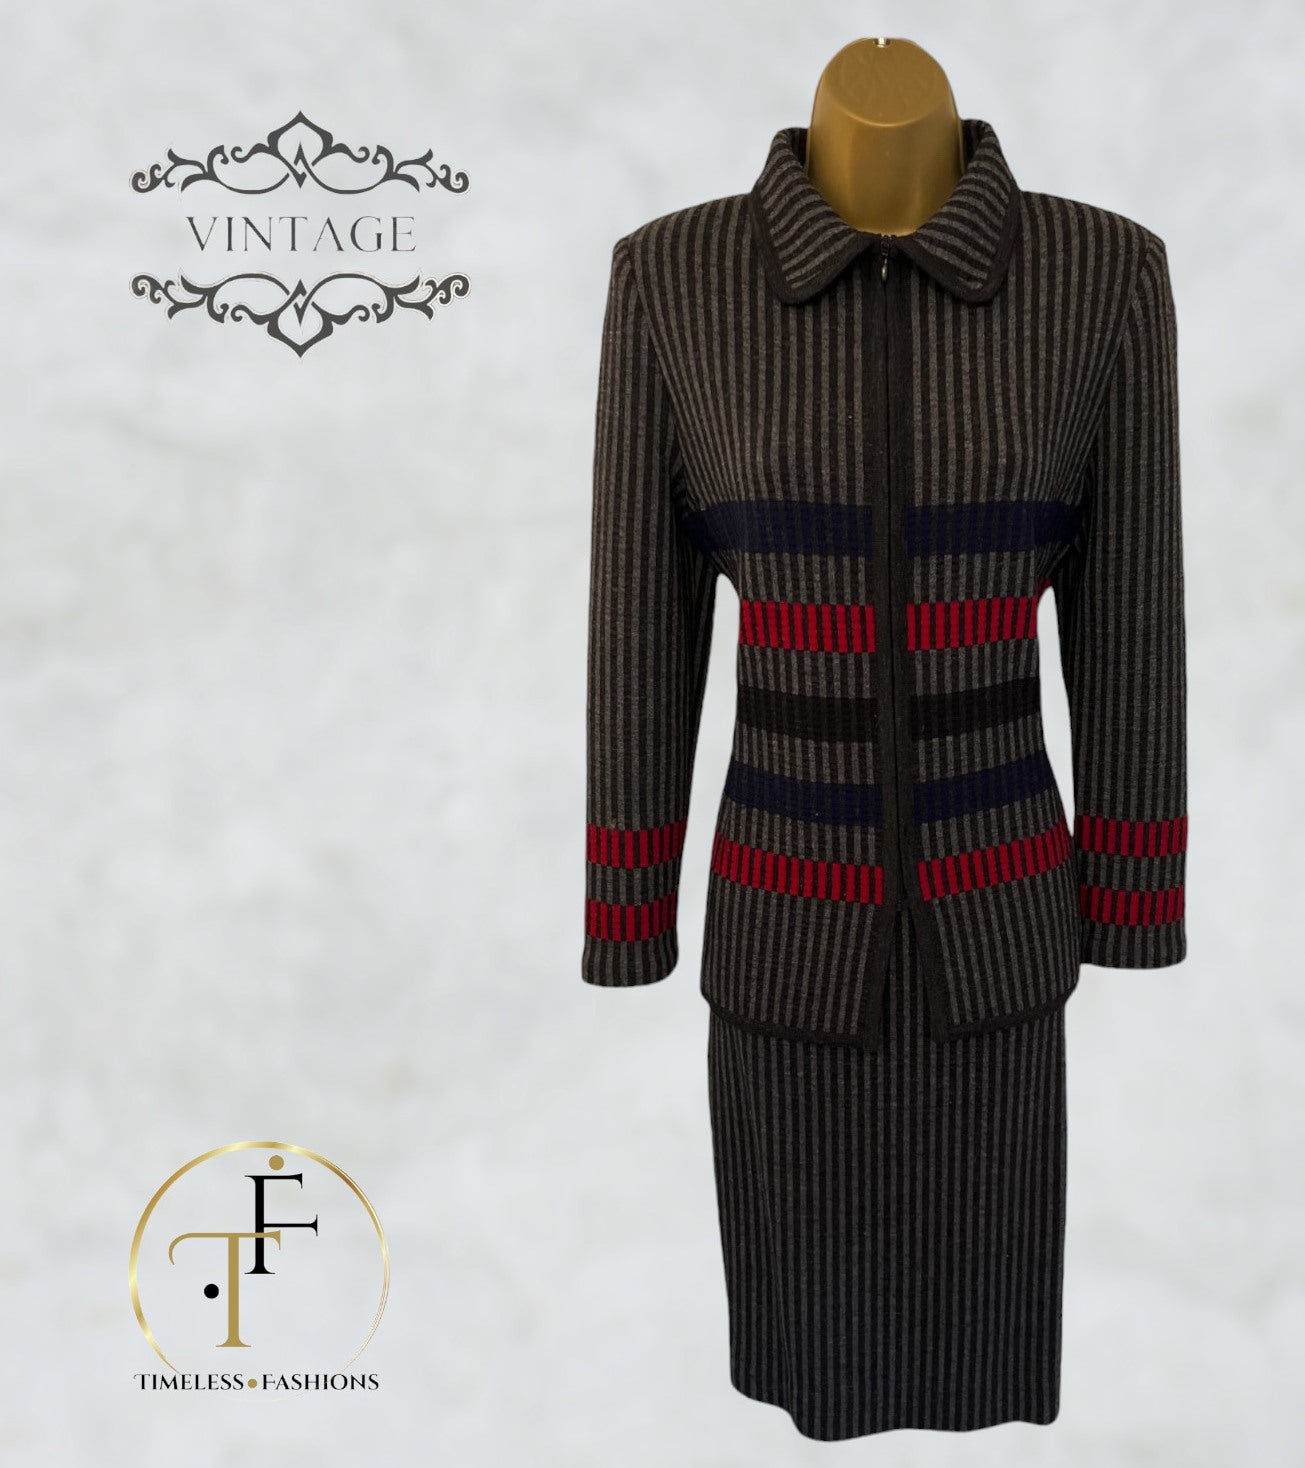 Avagolf Womens Vintage Grey Wool Striped 1960's Skirt Suit UK 10 US 6 EU 38 IT 42 Timeless Fashions